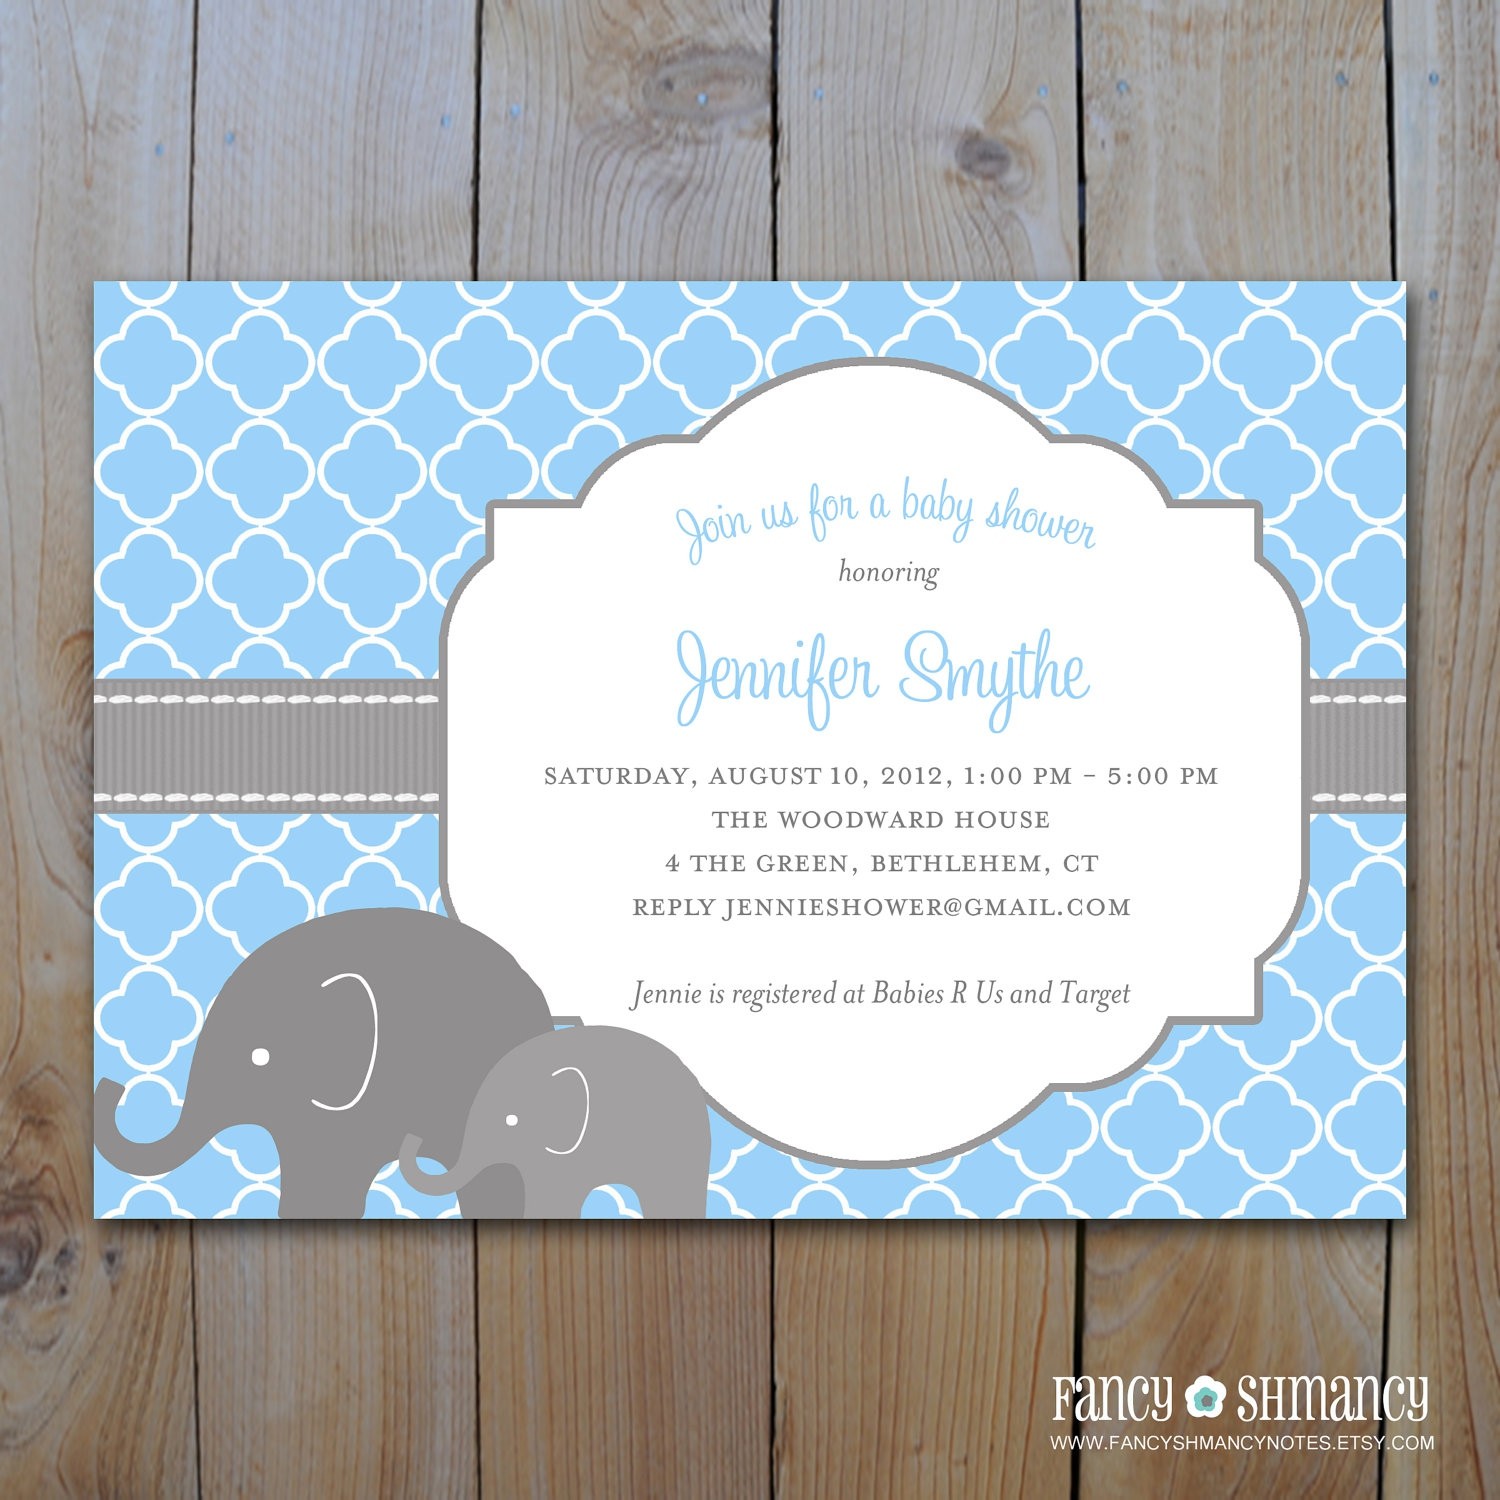 Full Size of Baby Shower:inspirational Elephant Baby Shower Invitations Photo Concepts Baby Shower Registry List With Baby Shower Crafts Plus Baby Shower Cards For Boy Together With Creative Baby Shower Gifts As Well As Baby Shower Items And Baby Shower Stores